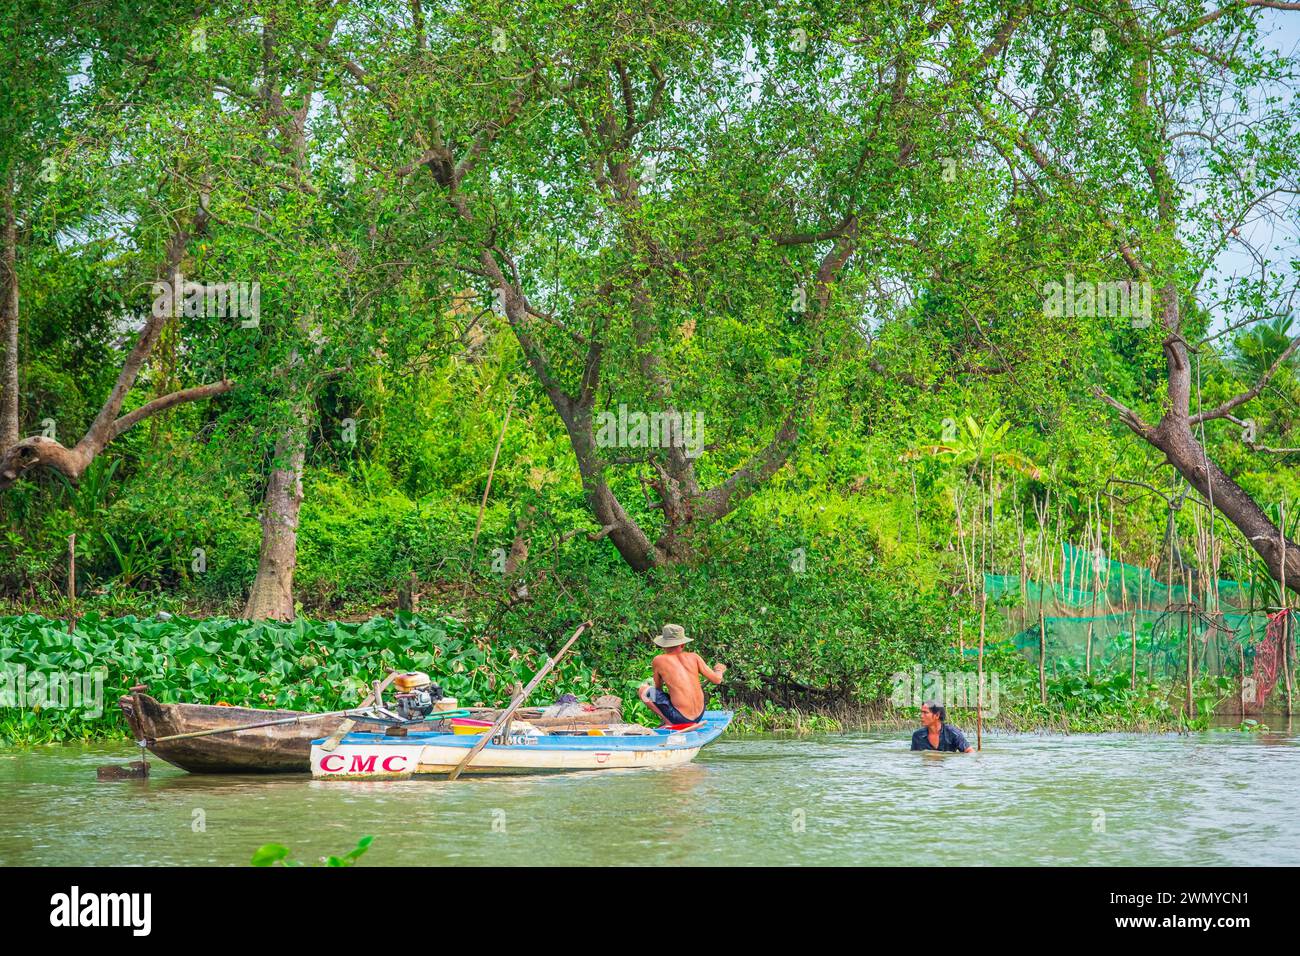 Vietnam, Mekong Delta, Vinh Long province, An Binh Island, fishermen on one of the many canals or arroyos of the island Stock Photo